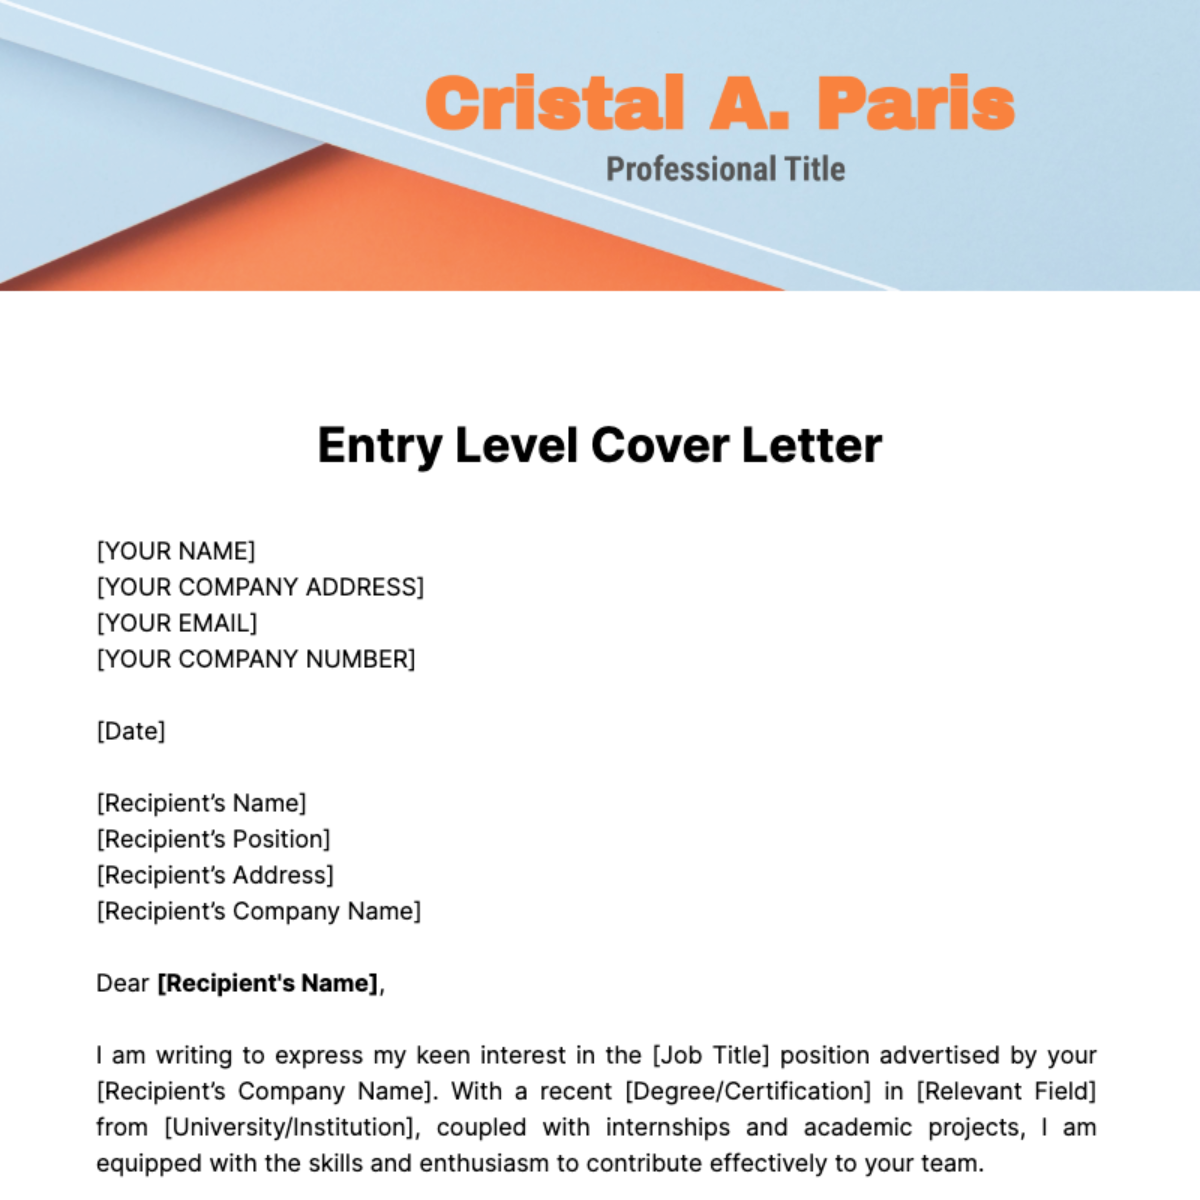 Entry Level Cover Letter Template